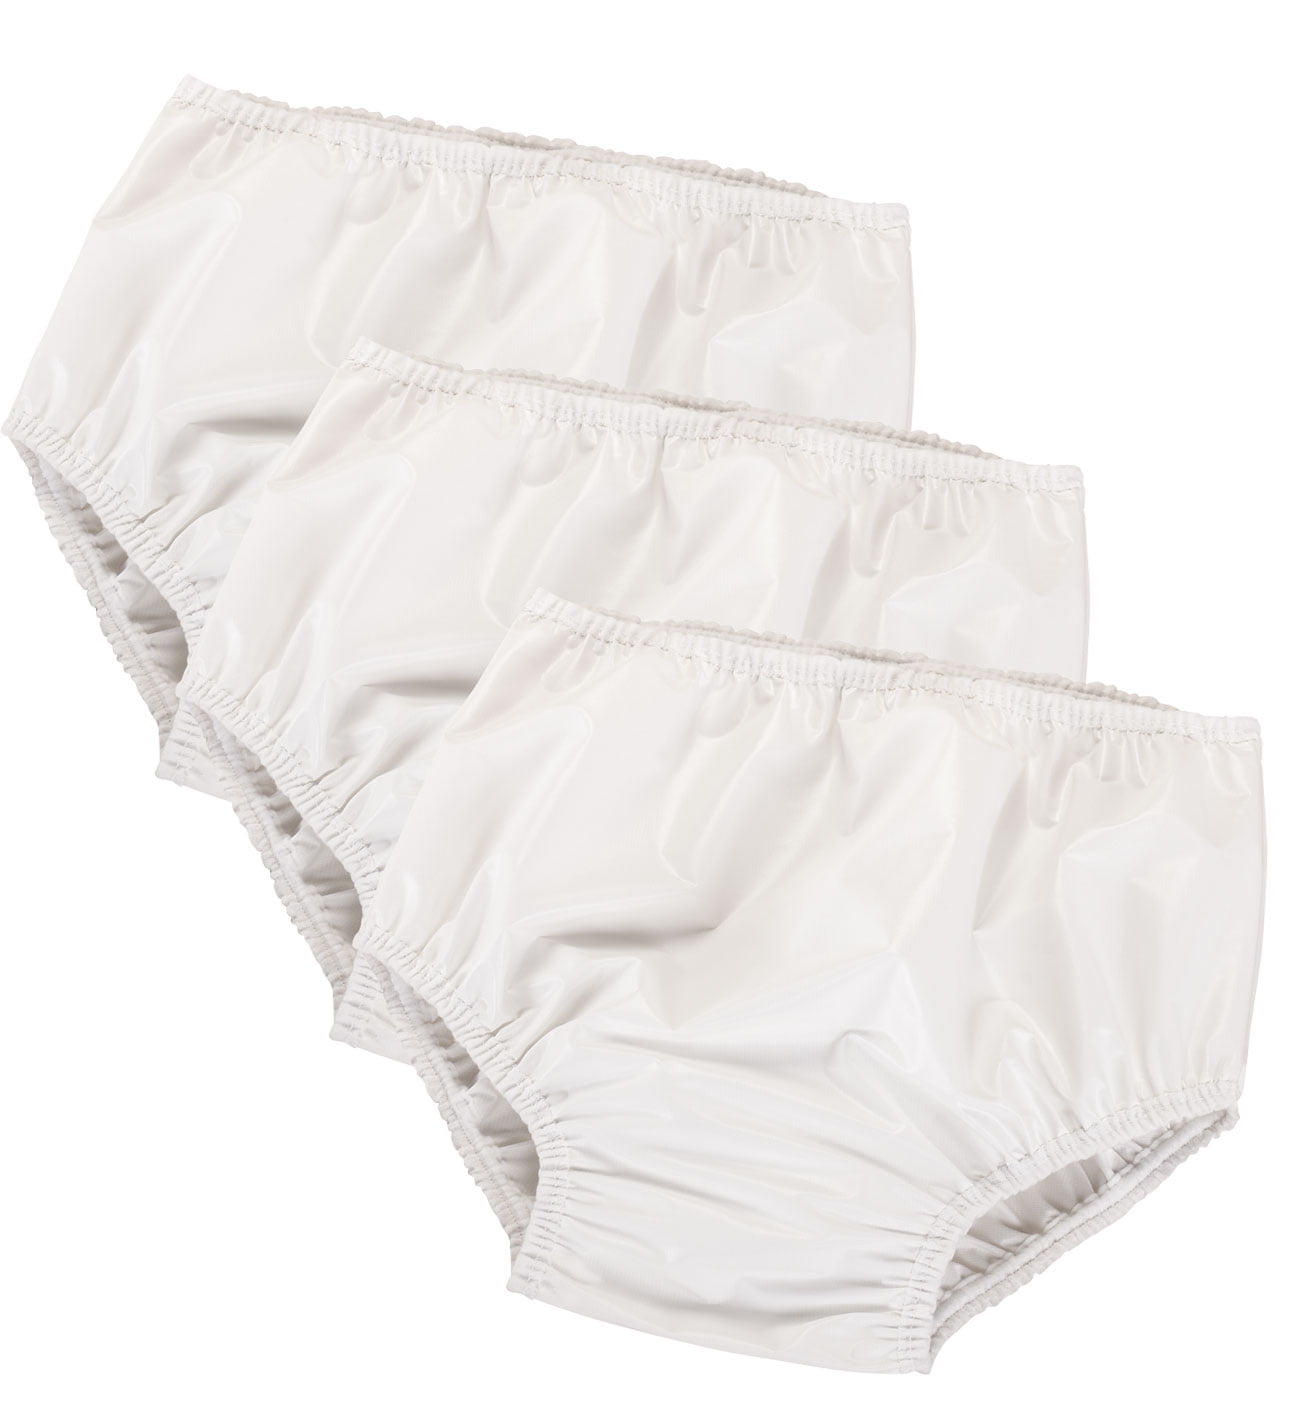 plastic pants for adults 2, plastic pants for adults 2 Suppliers and  Manufacturers at